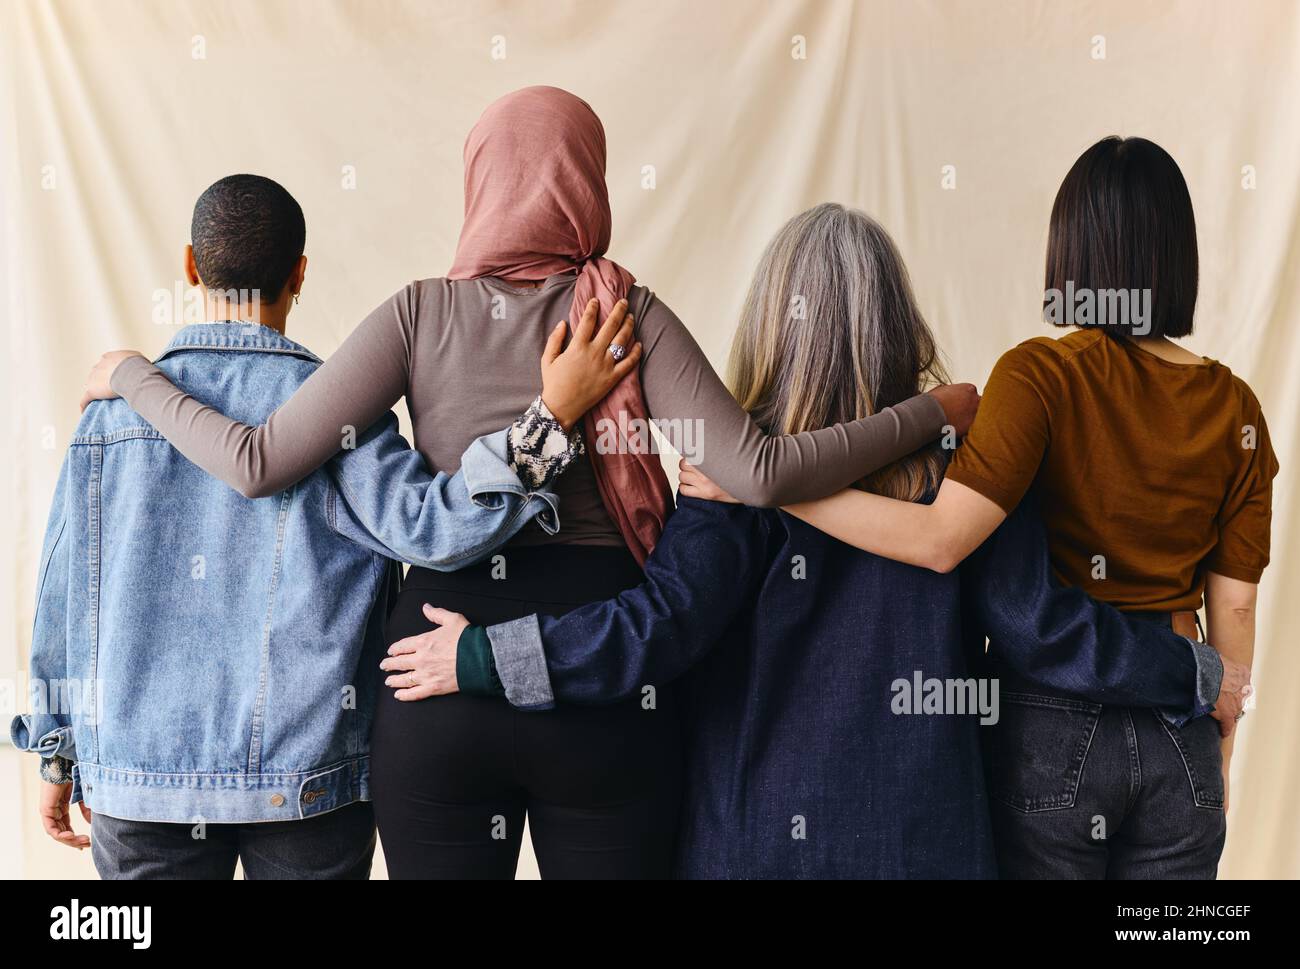 Rear view of four women with arms around each other in support of International Women's Day Stock Photo